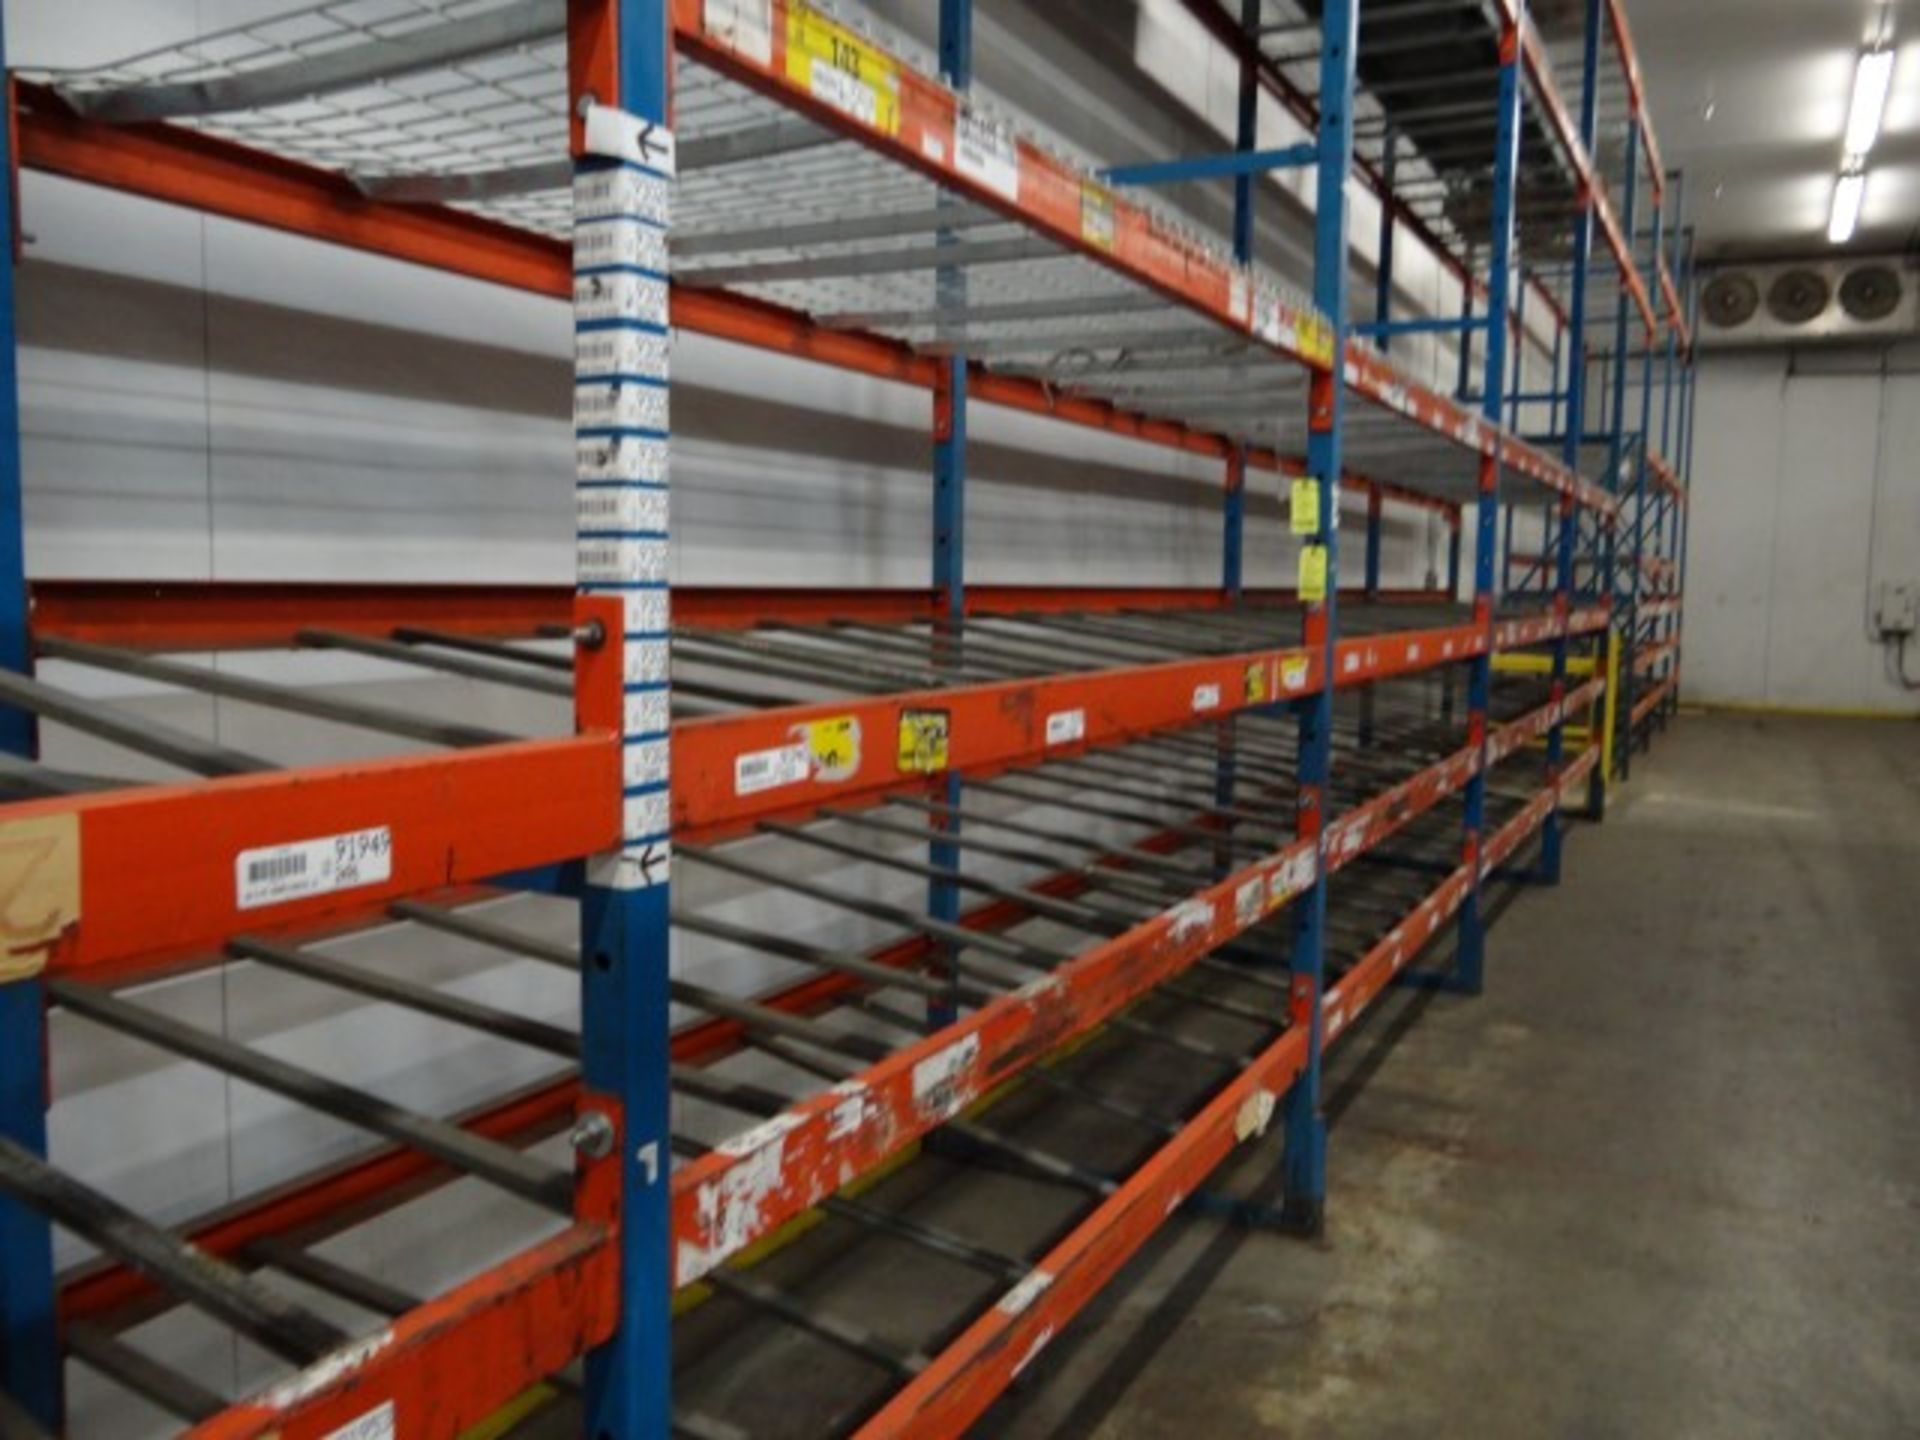 10 Sections of Pallet Racking Approximately 8x4x18 - Image 2 of 3